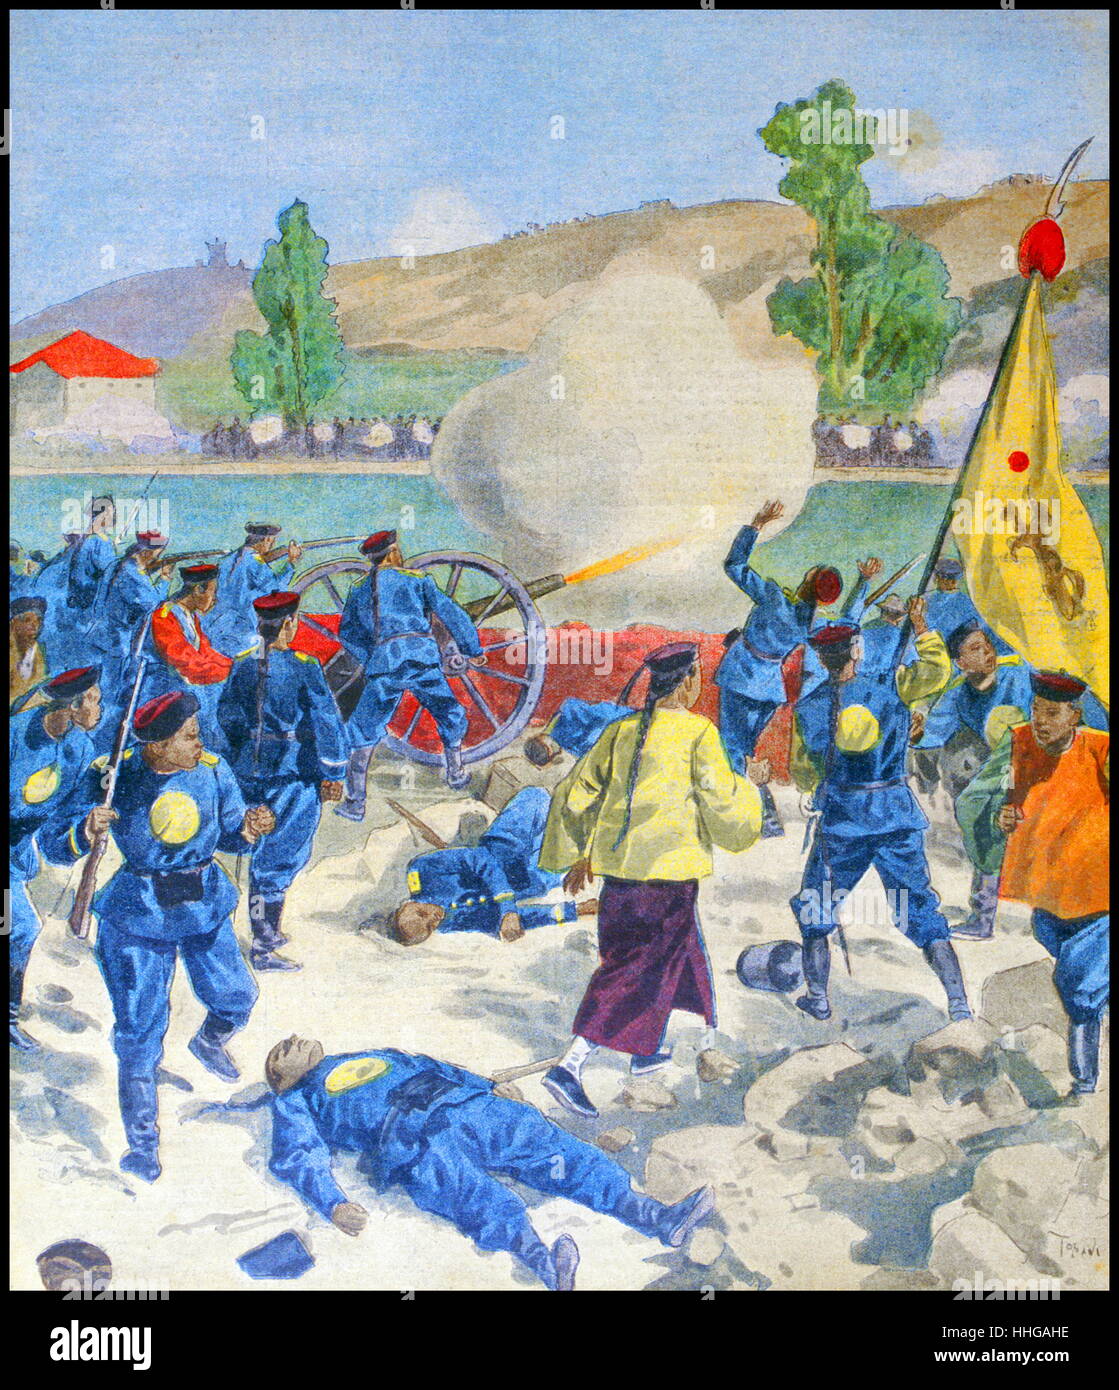 Boxer rebels with flag in action during a battle in the Boxer Uprising or Yihequan Movement. This was a violent anti-foreign and anti-Christian uprising that took place in China between 1899 and